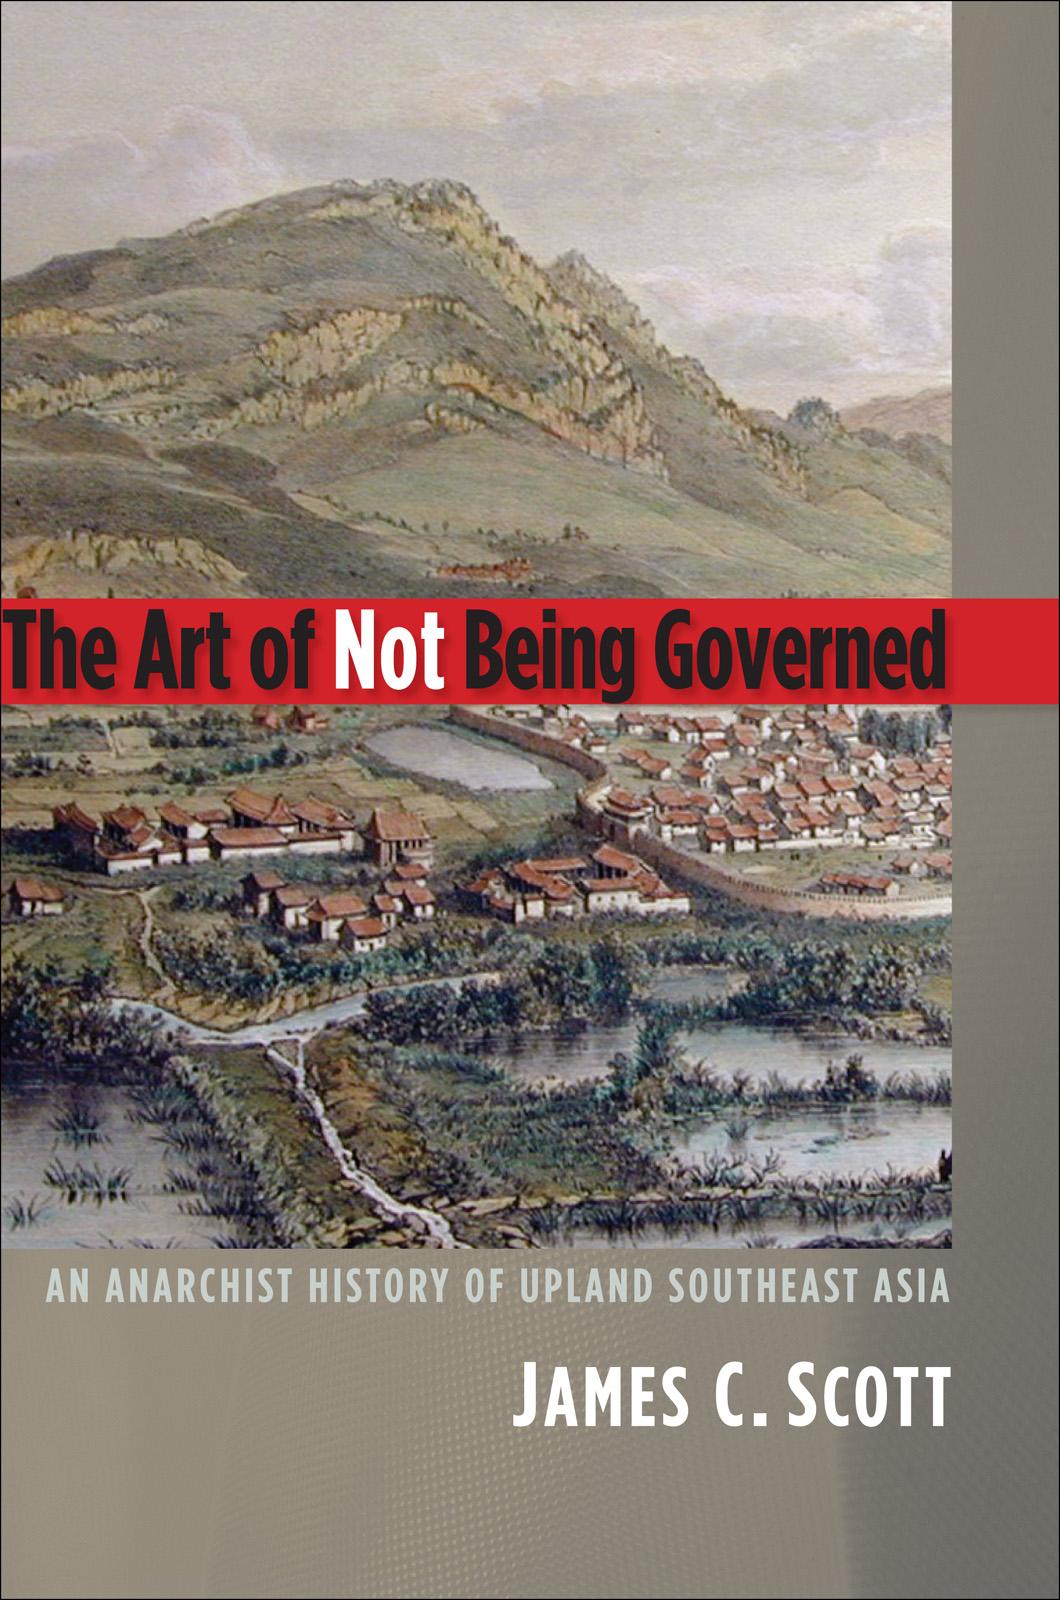 James C. Scott: The Art of Not Being Governed